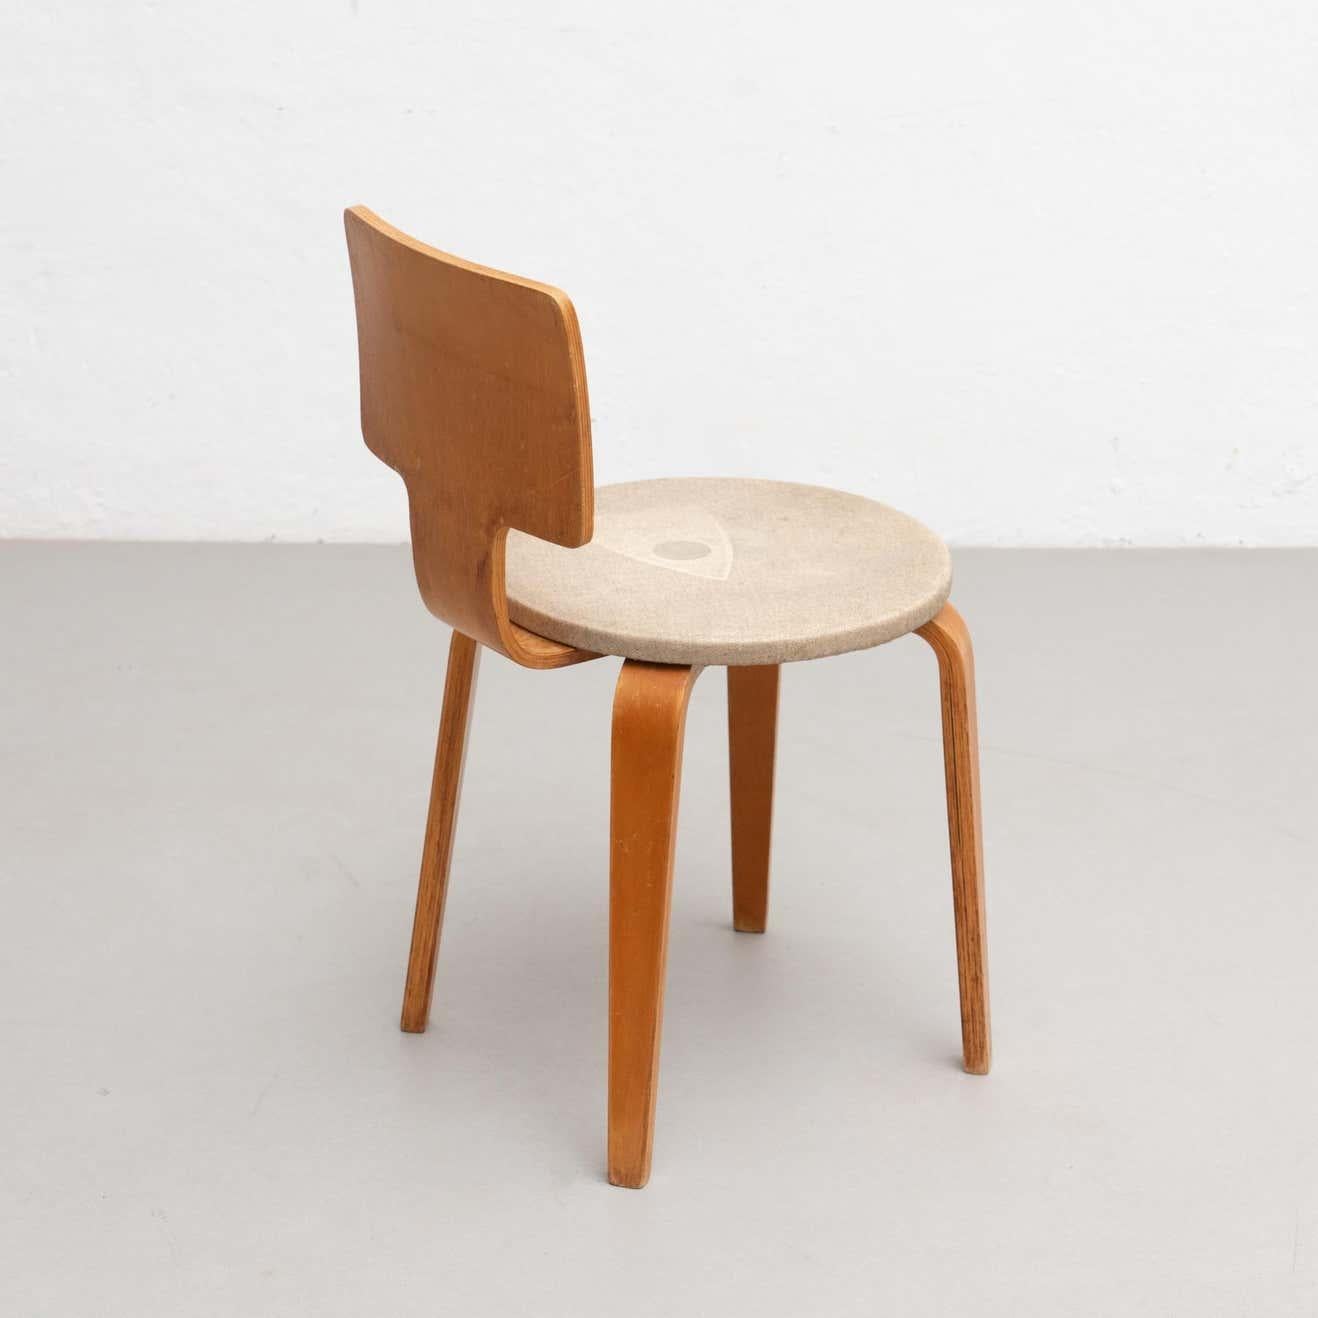 Set of Cor Alons Plywood and Upholstery Chair and Stool, circa 1950 For Sale 11